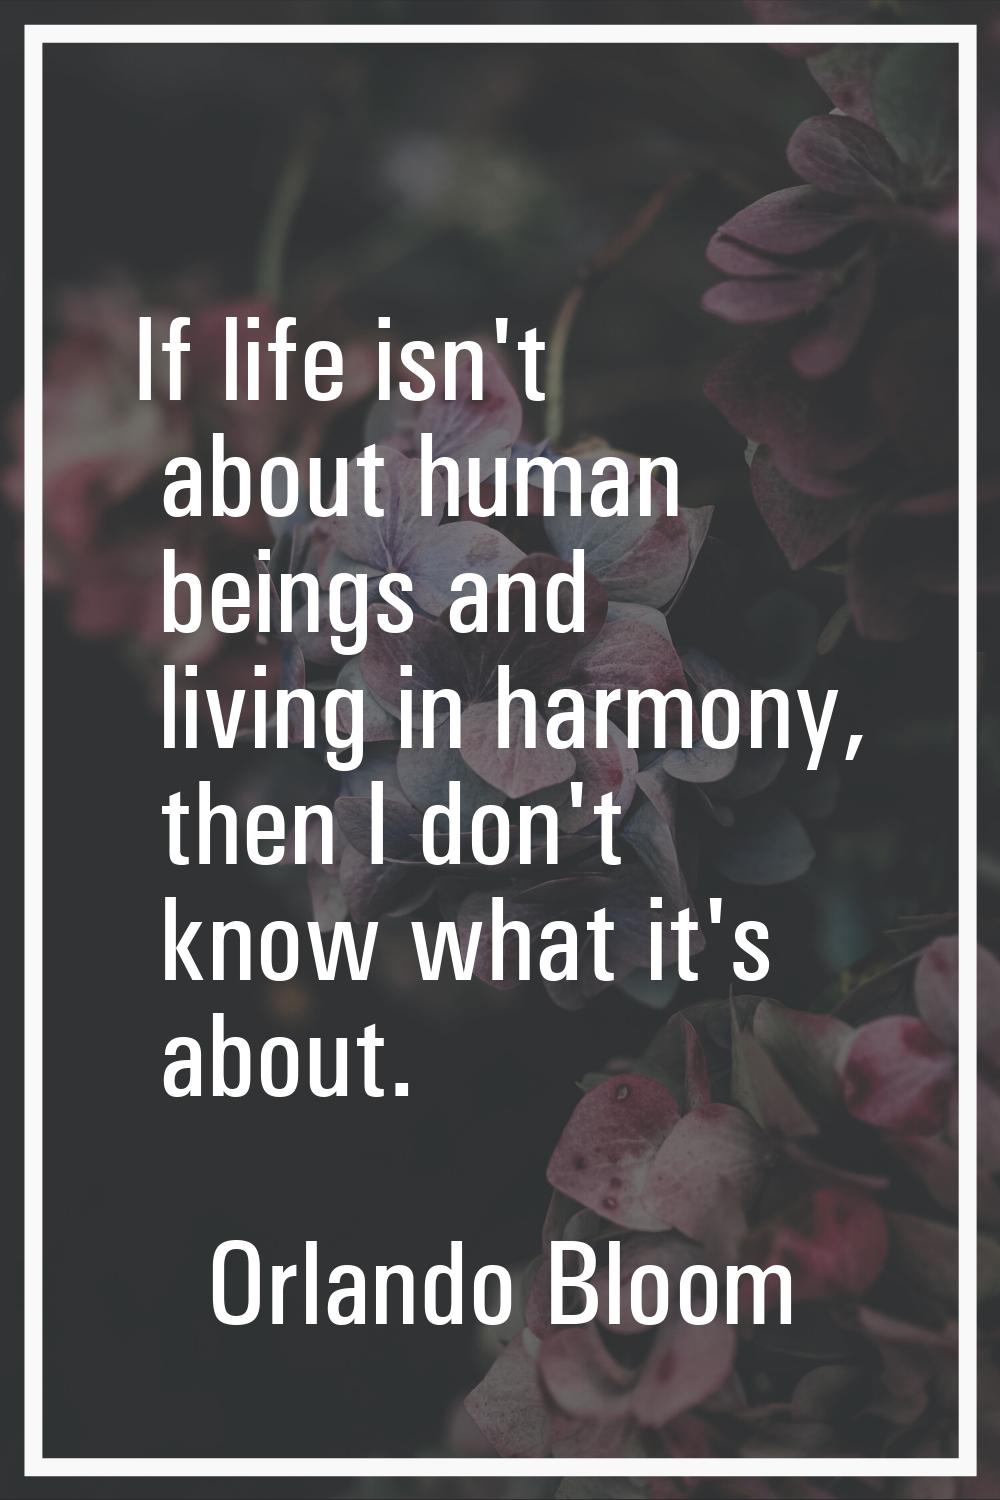 If life isn't about human beings and living in harmony, then I don't know what it's about.